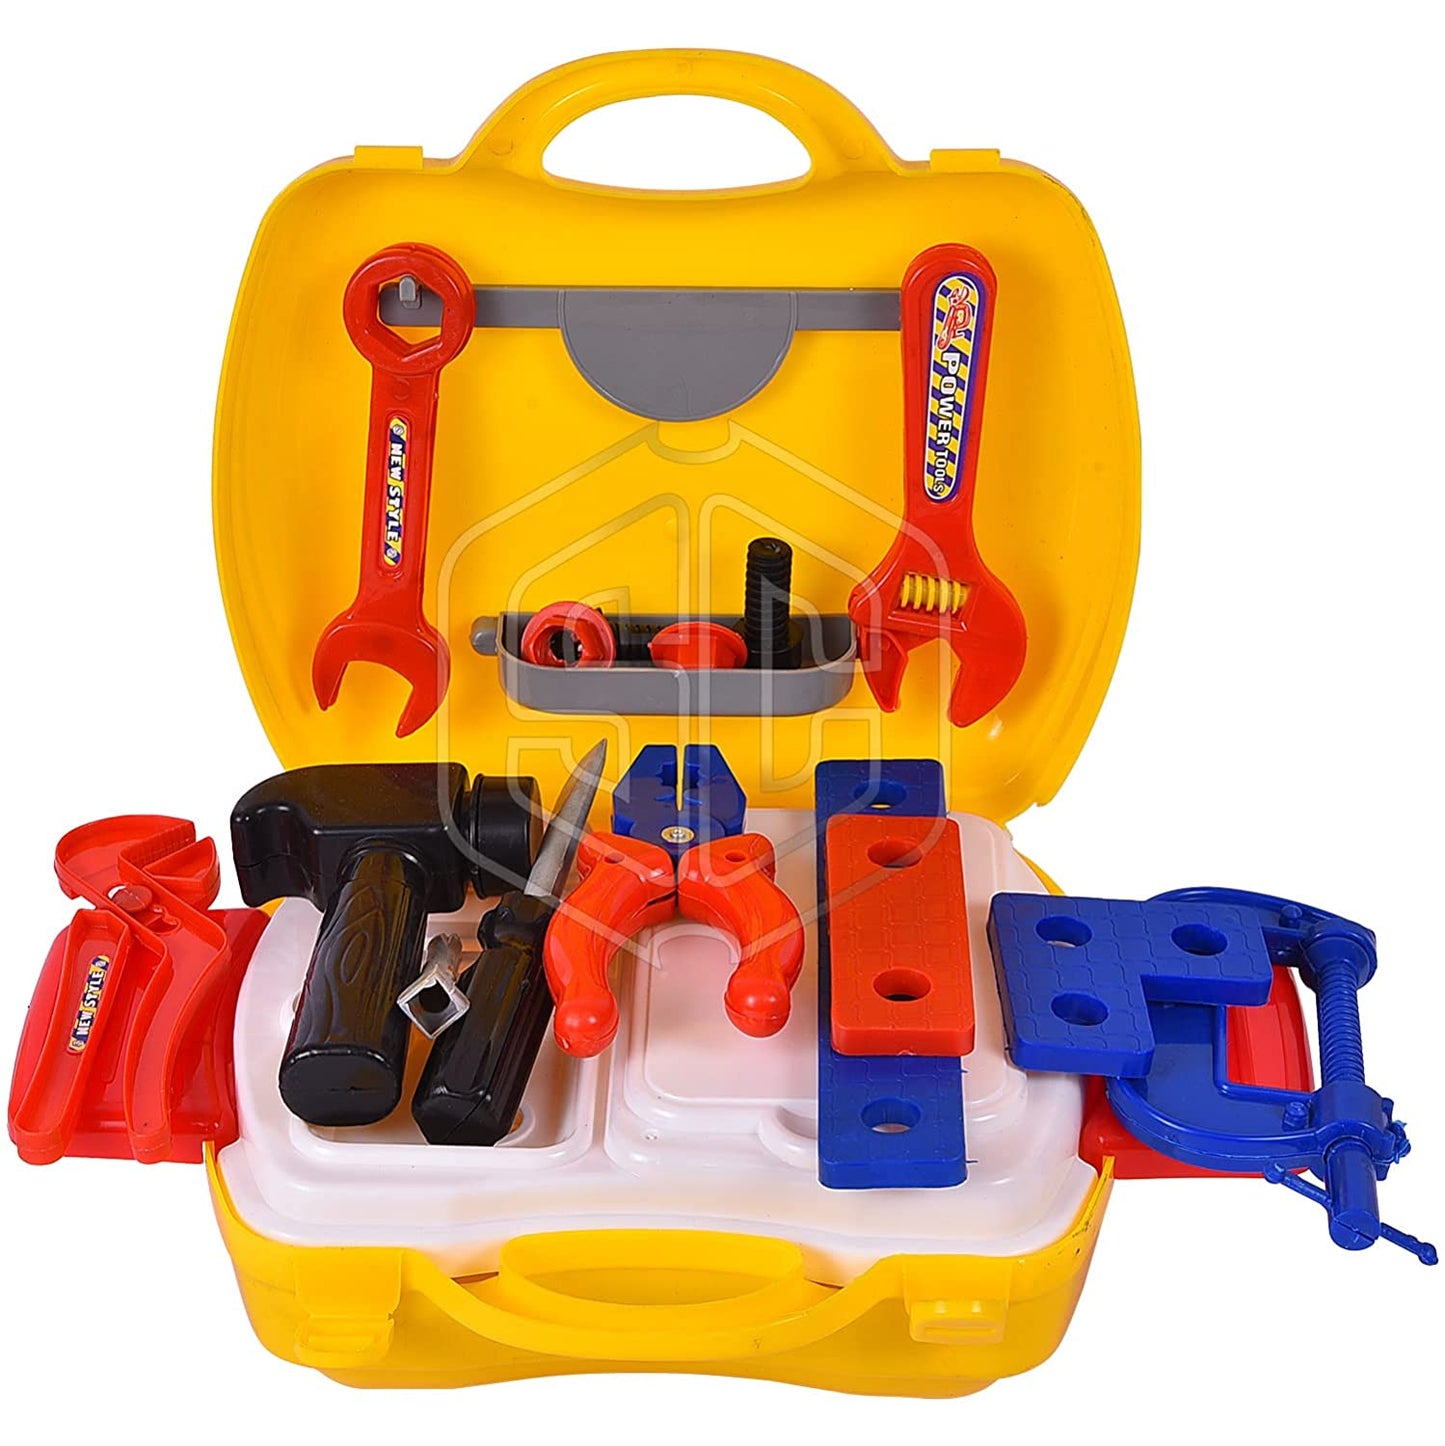 Tool Set, Best Screwdriver Set Toys For Kids, Set Of 16 Pieces, Pretend Play Tool Kit Set For Kids